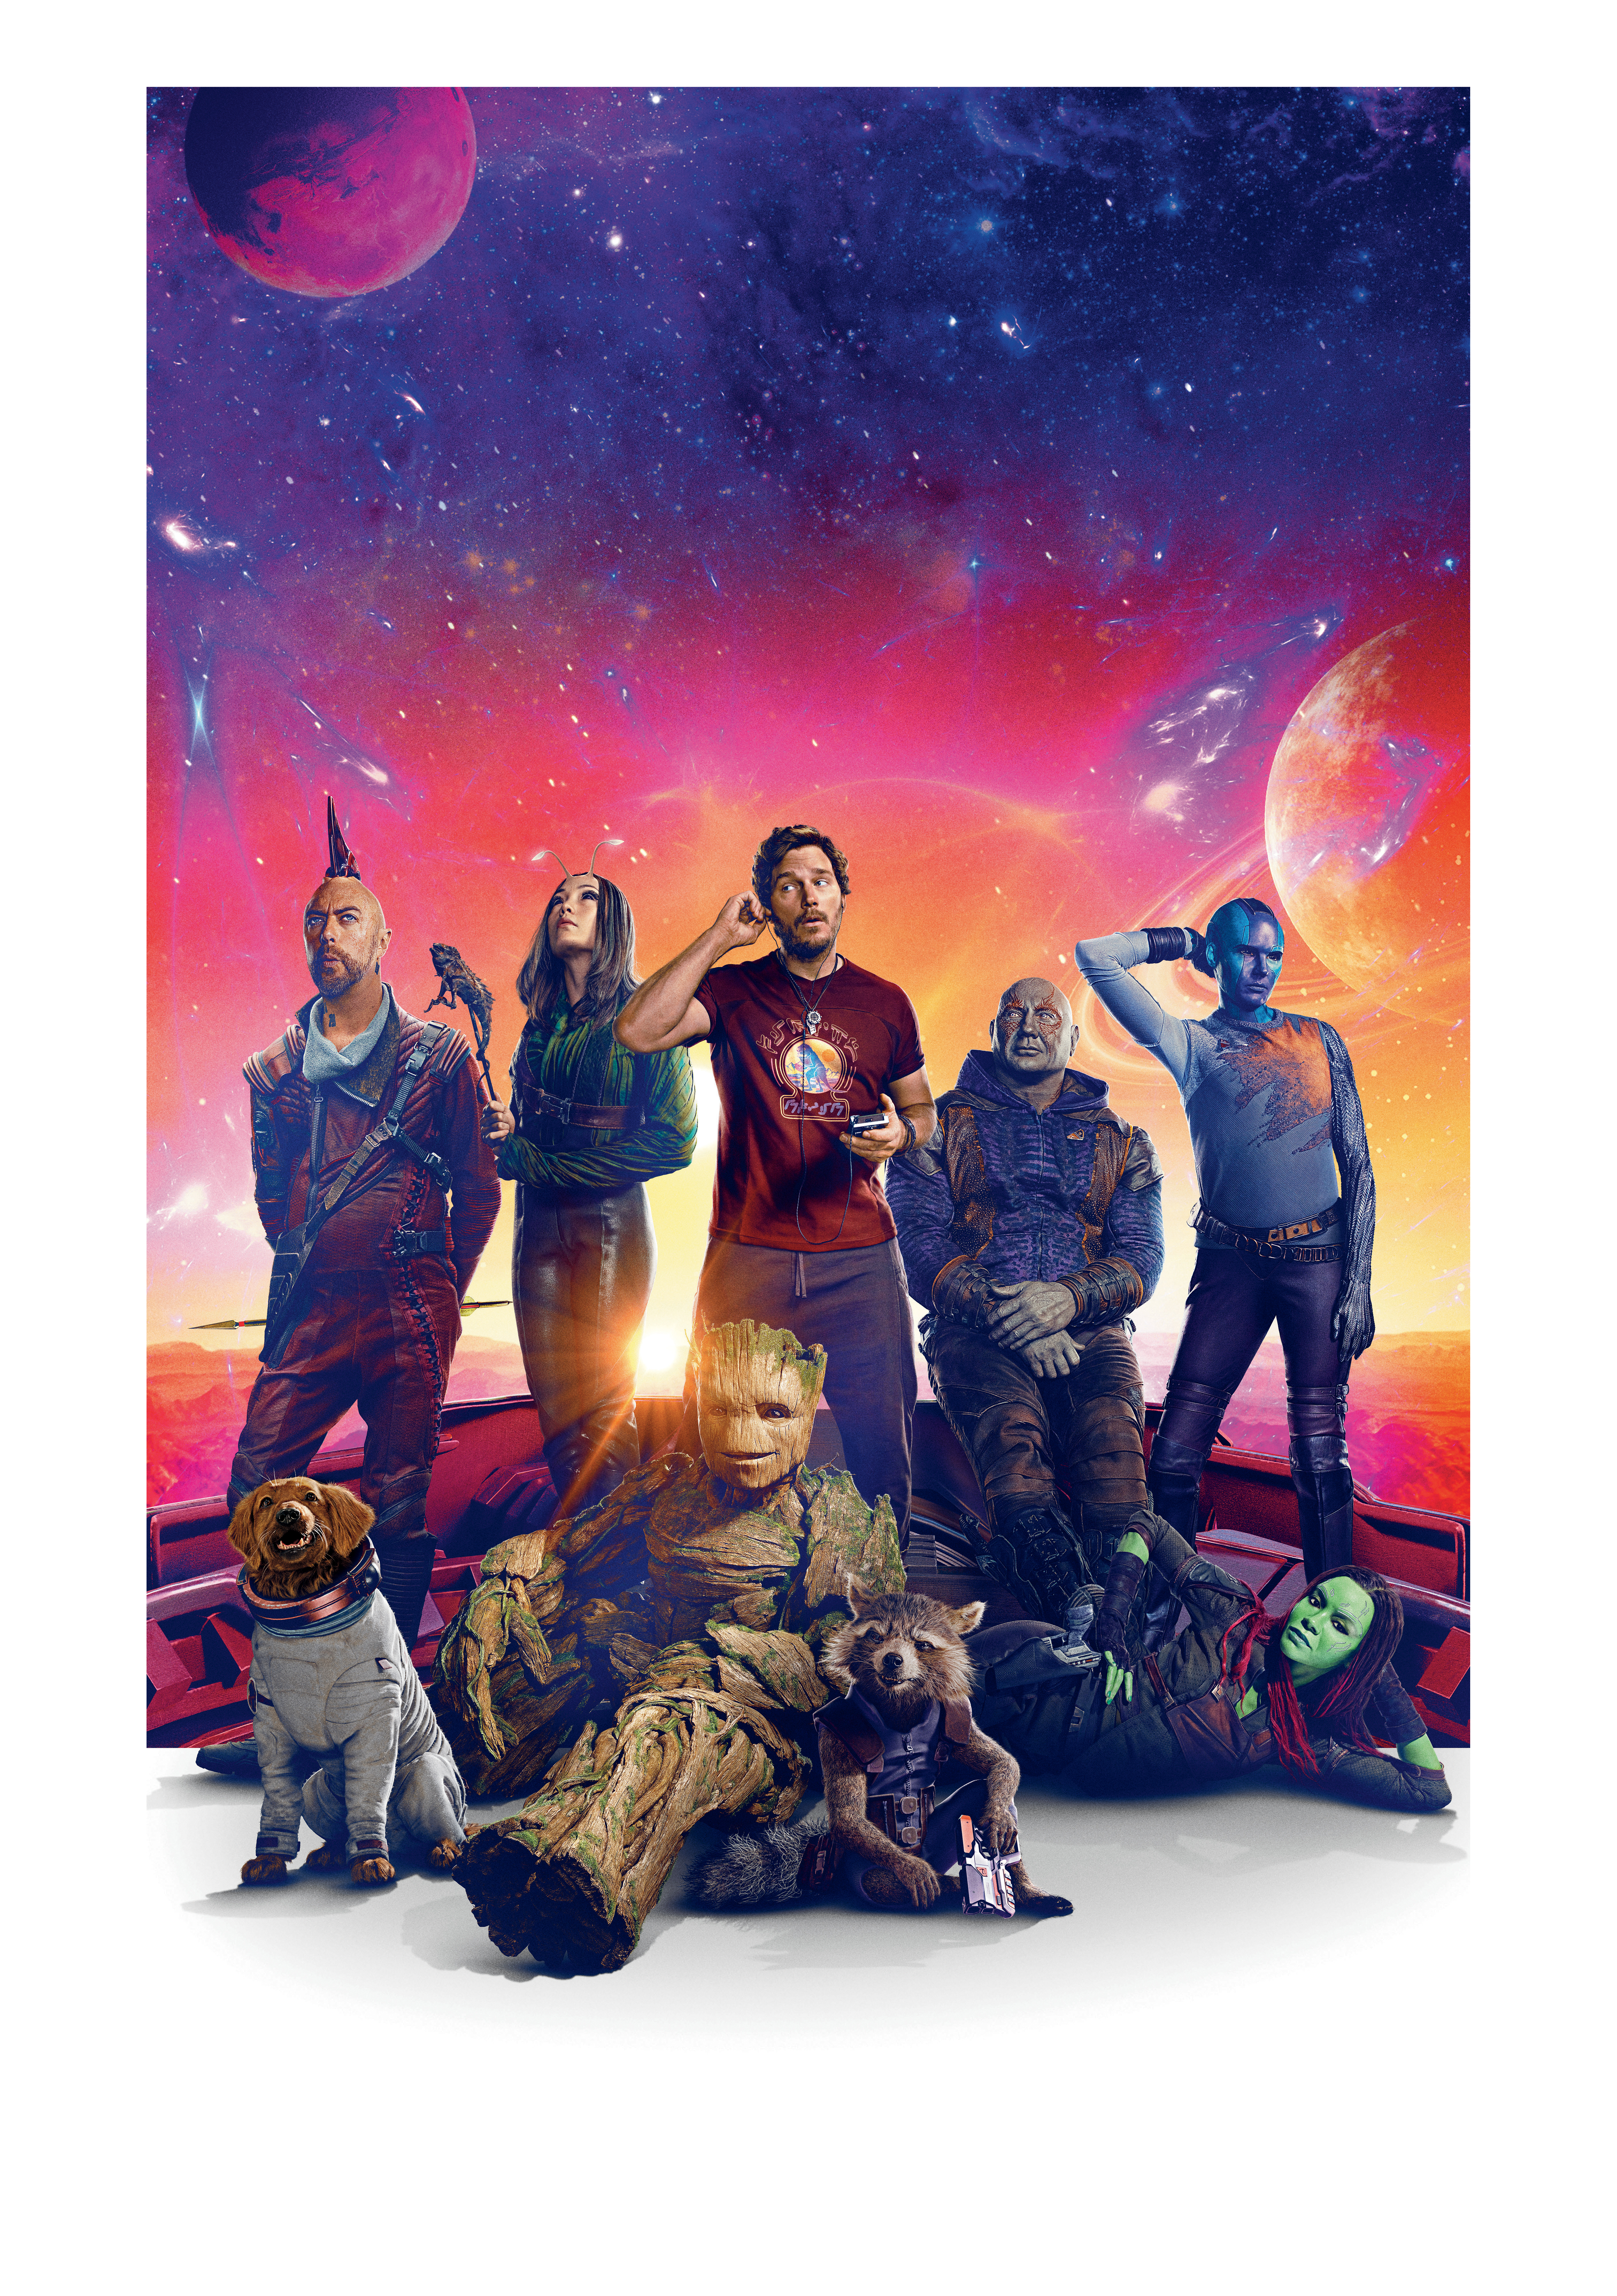 Guardians of the Galaxy Vol. 3 Picture